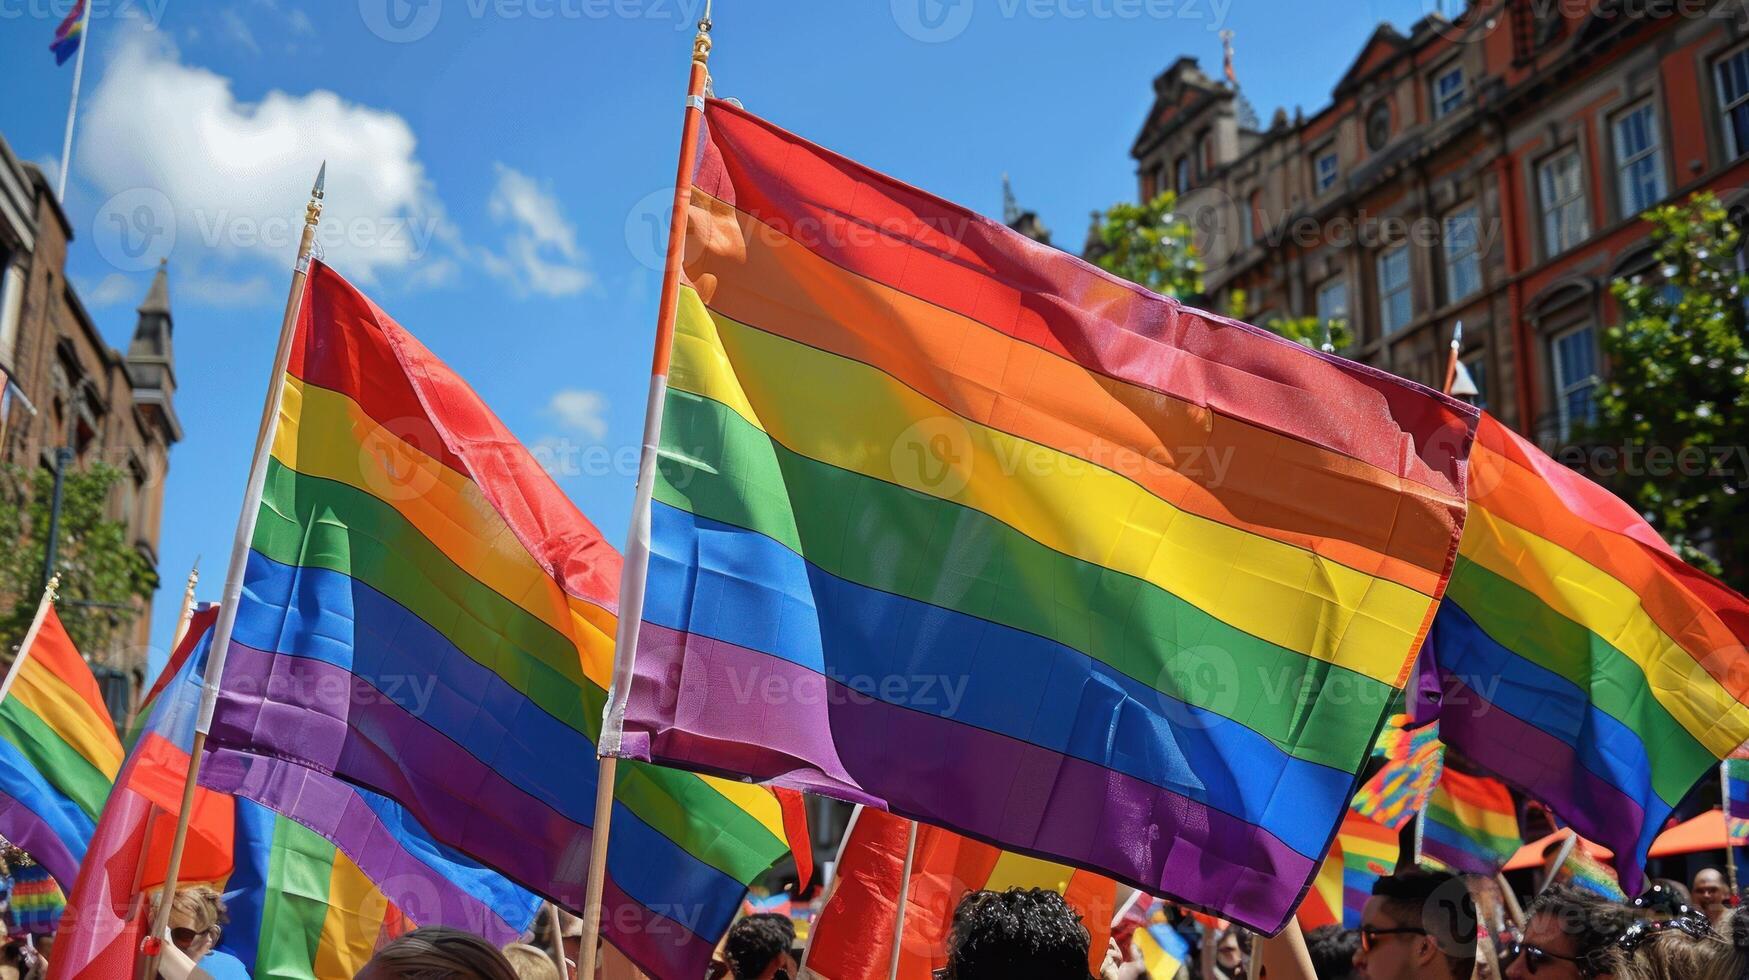 Colorful flags at a pride event photo